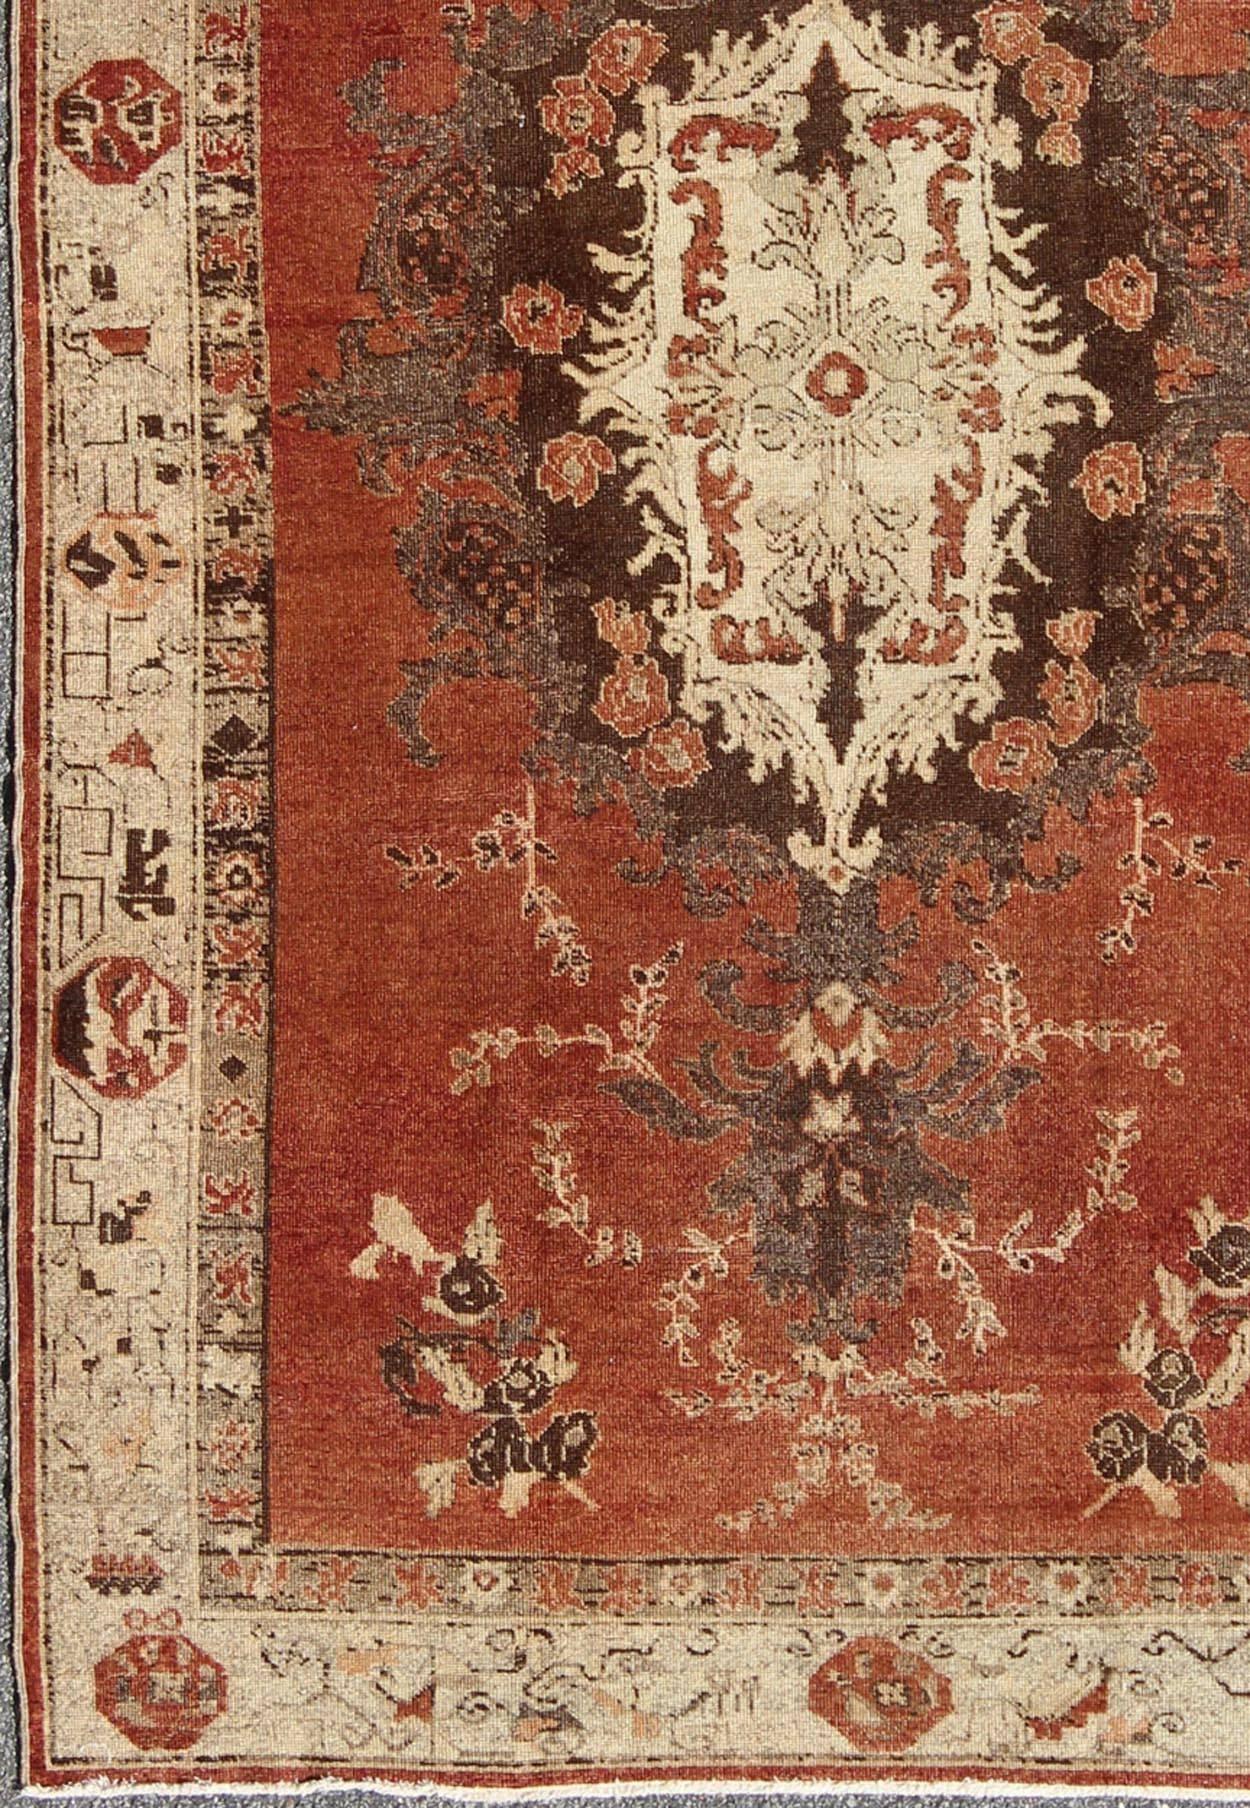 Vintage Oushak Carpet from Turkey with Faint Red Field and Floral Medallion. This vintage Turkish Oushak rug features a unique blend of colors and an intricately beautiful design. The central medallion is complemented by a symmetrical set of floral